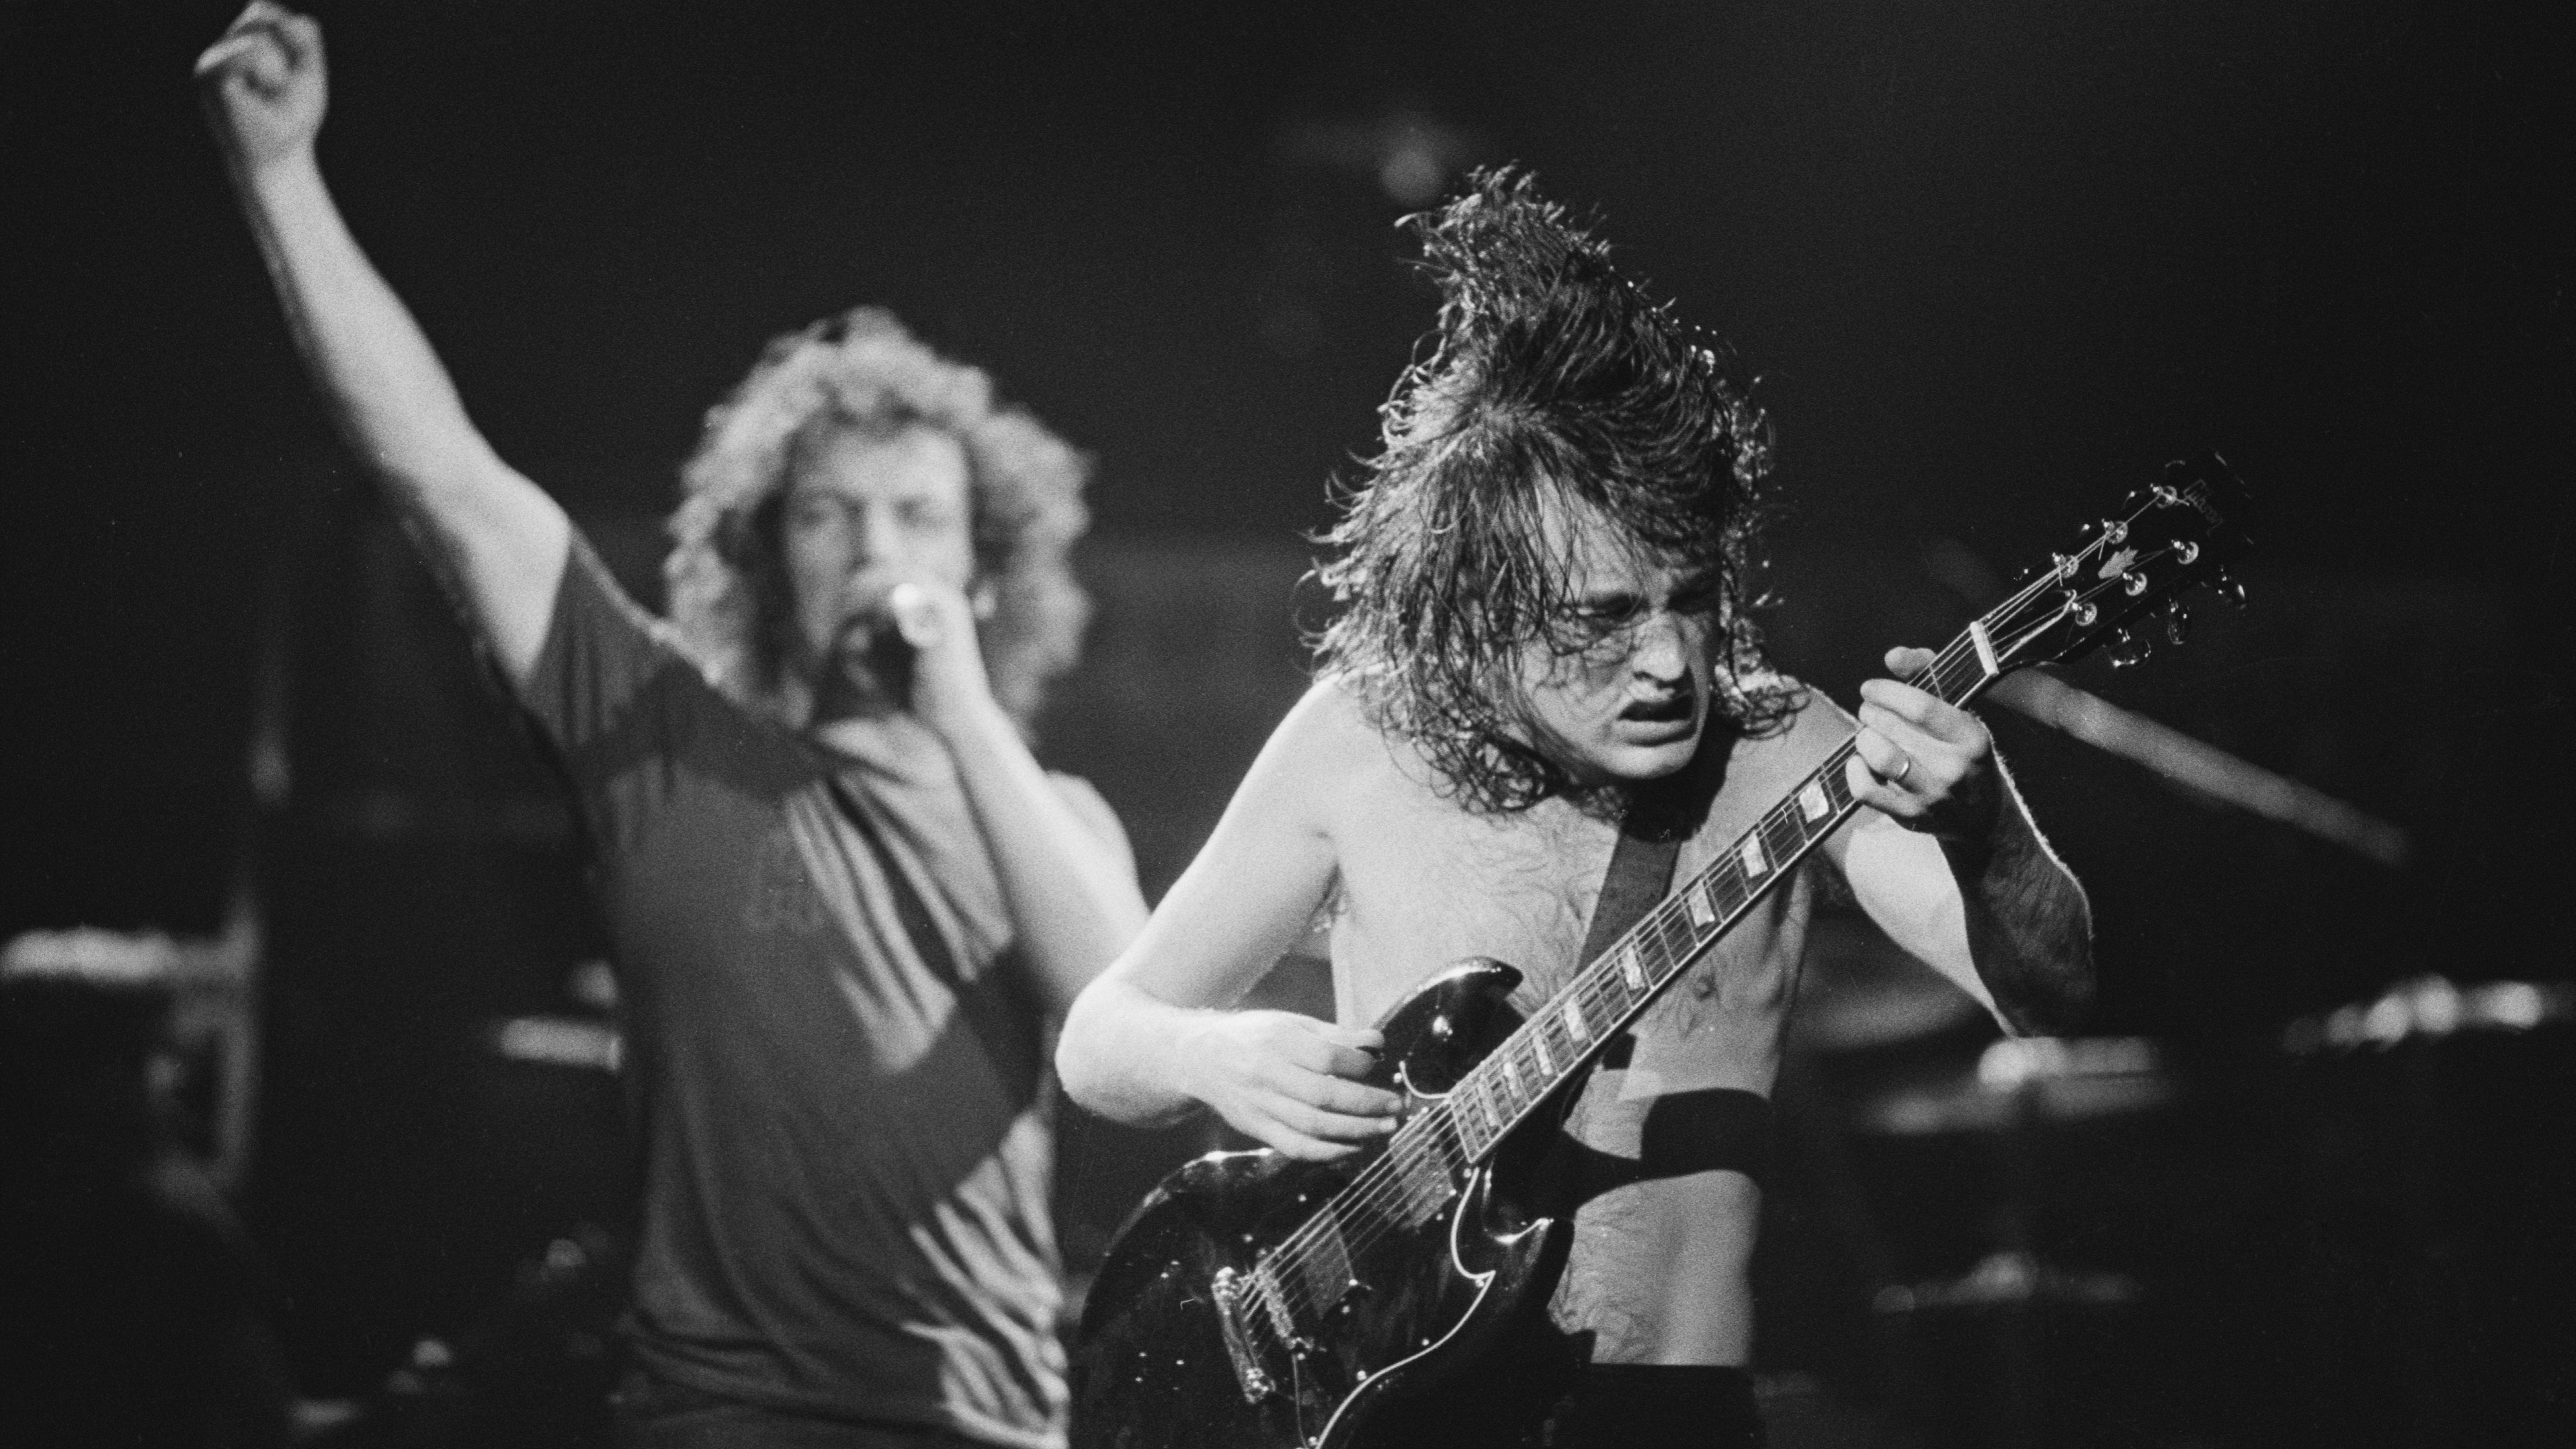 Back in Black — how AC/DC created definitive hard rock song